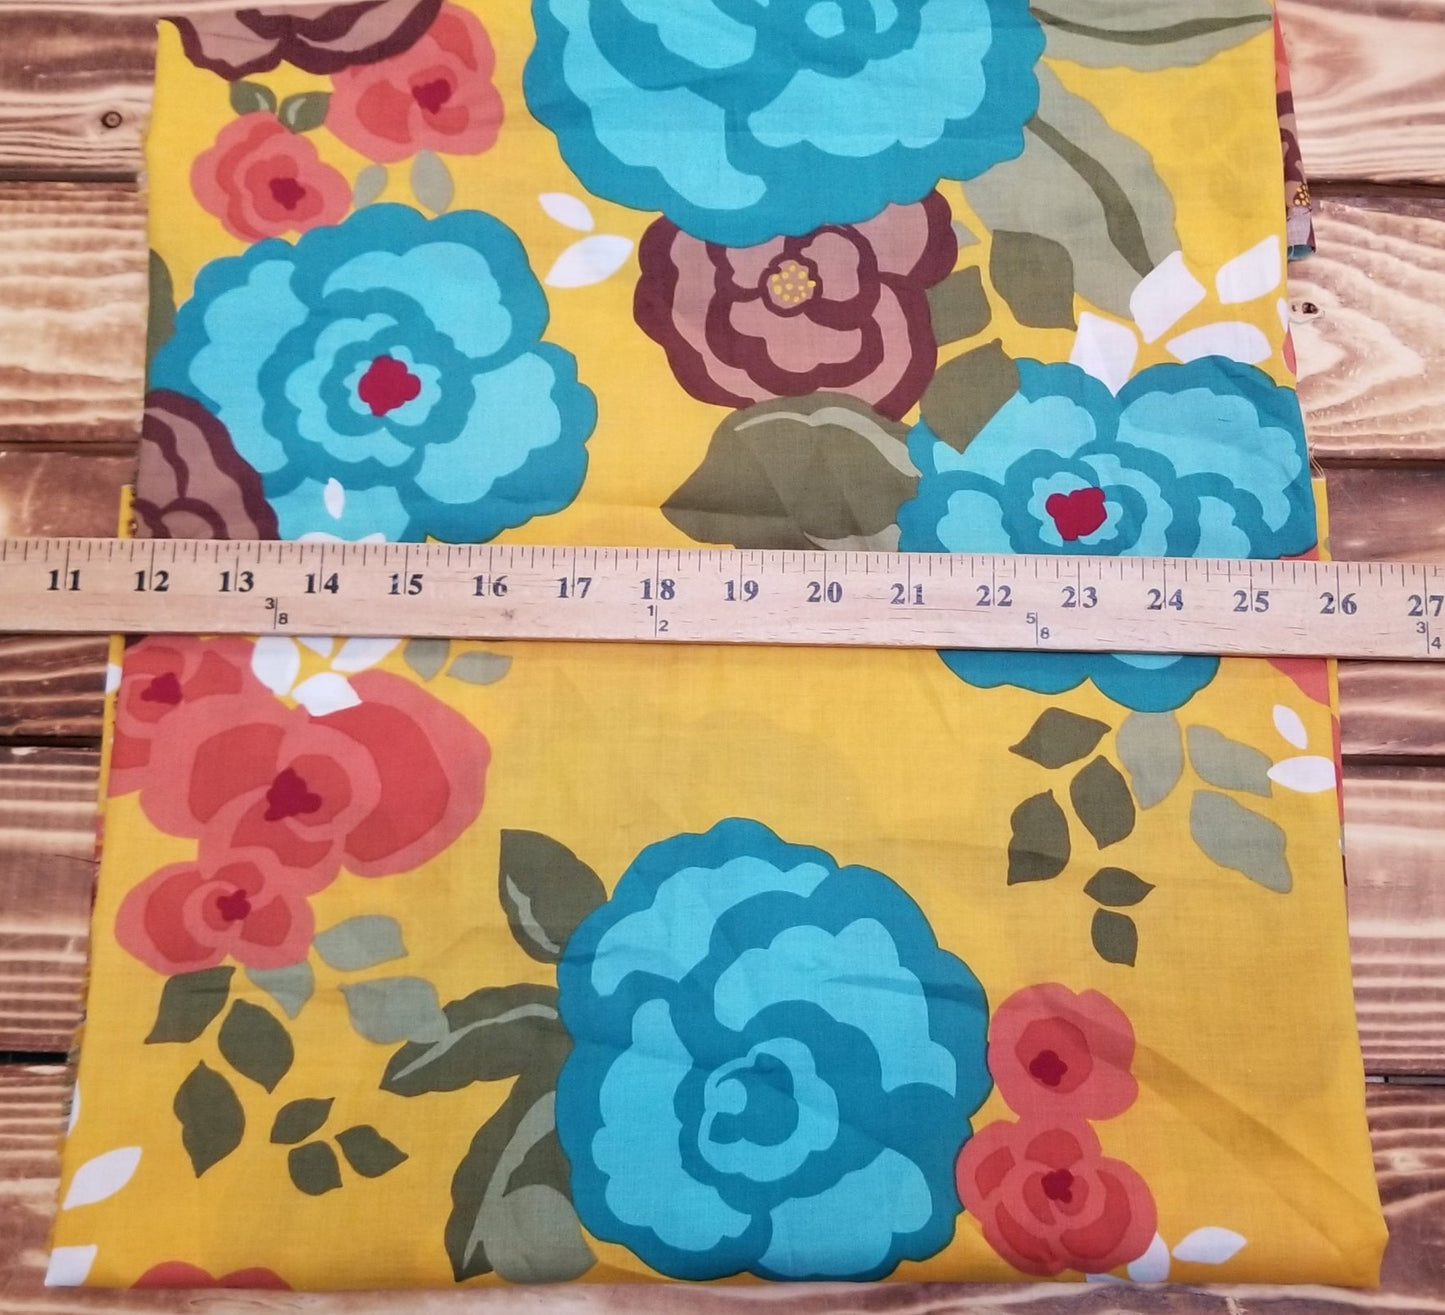 Designer Deadstock Cotton Lawn Large Floral Marigold Yellow 2.36oz Woven- Sold by the yard